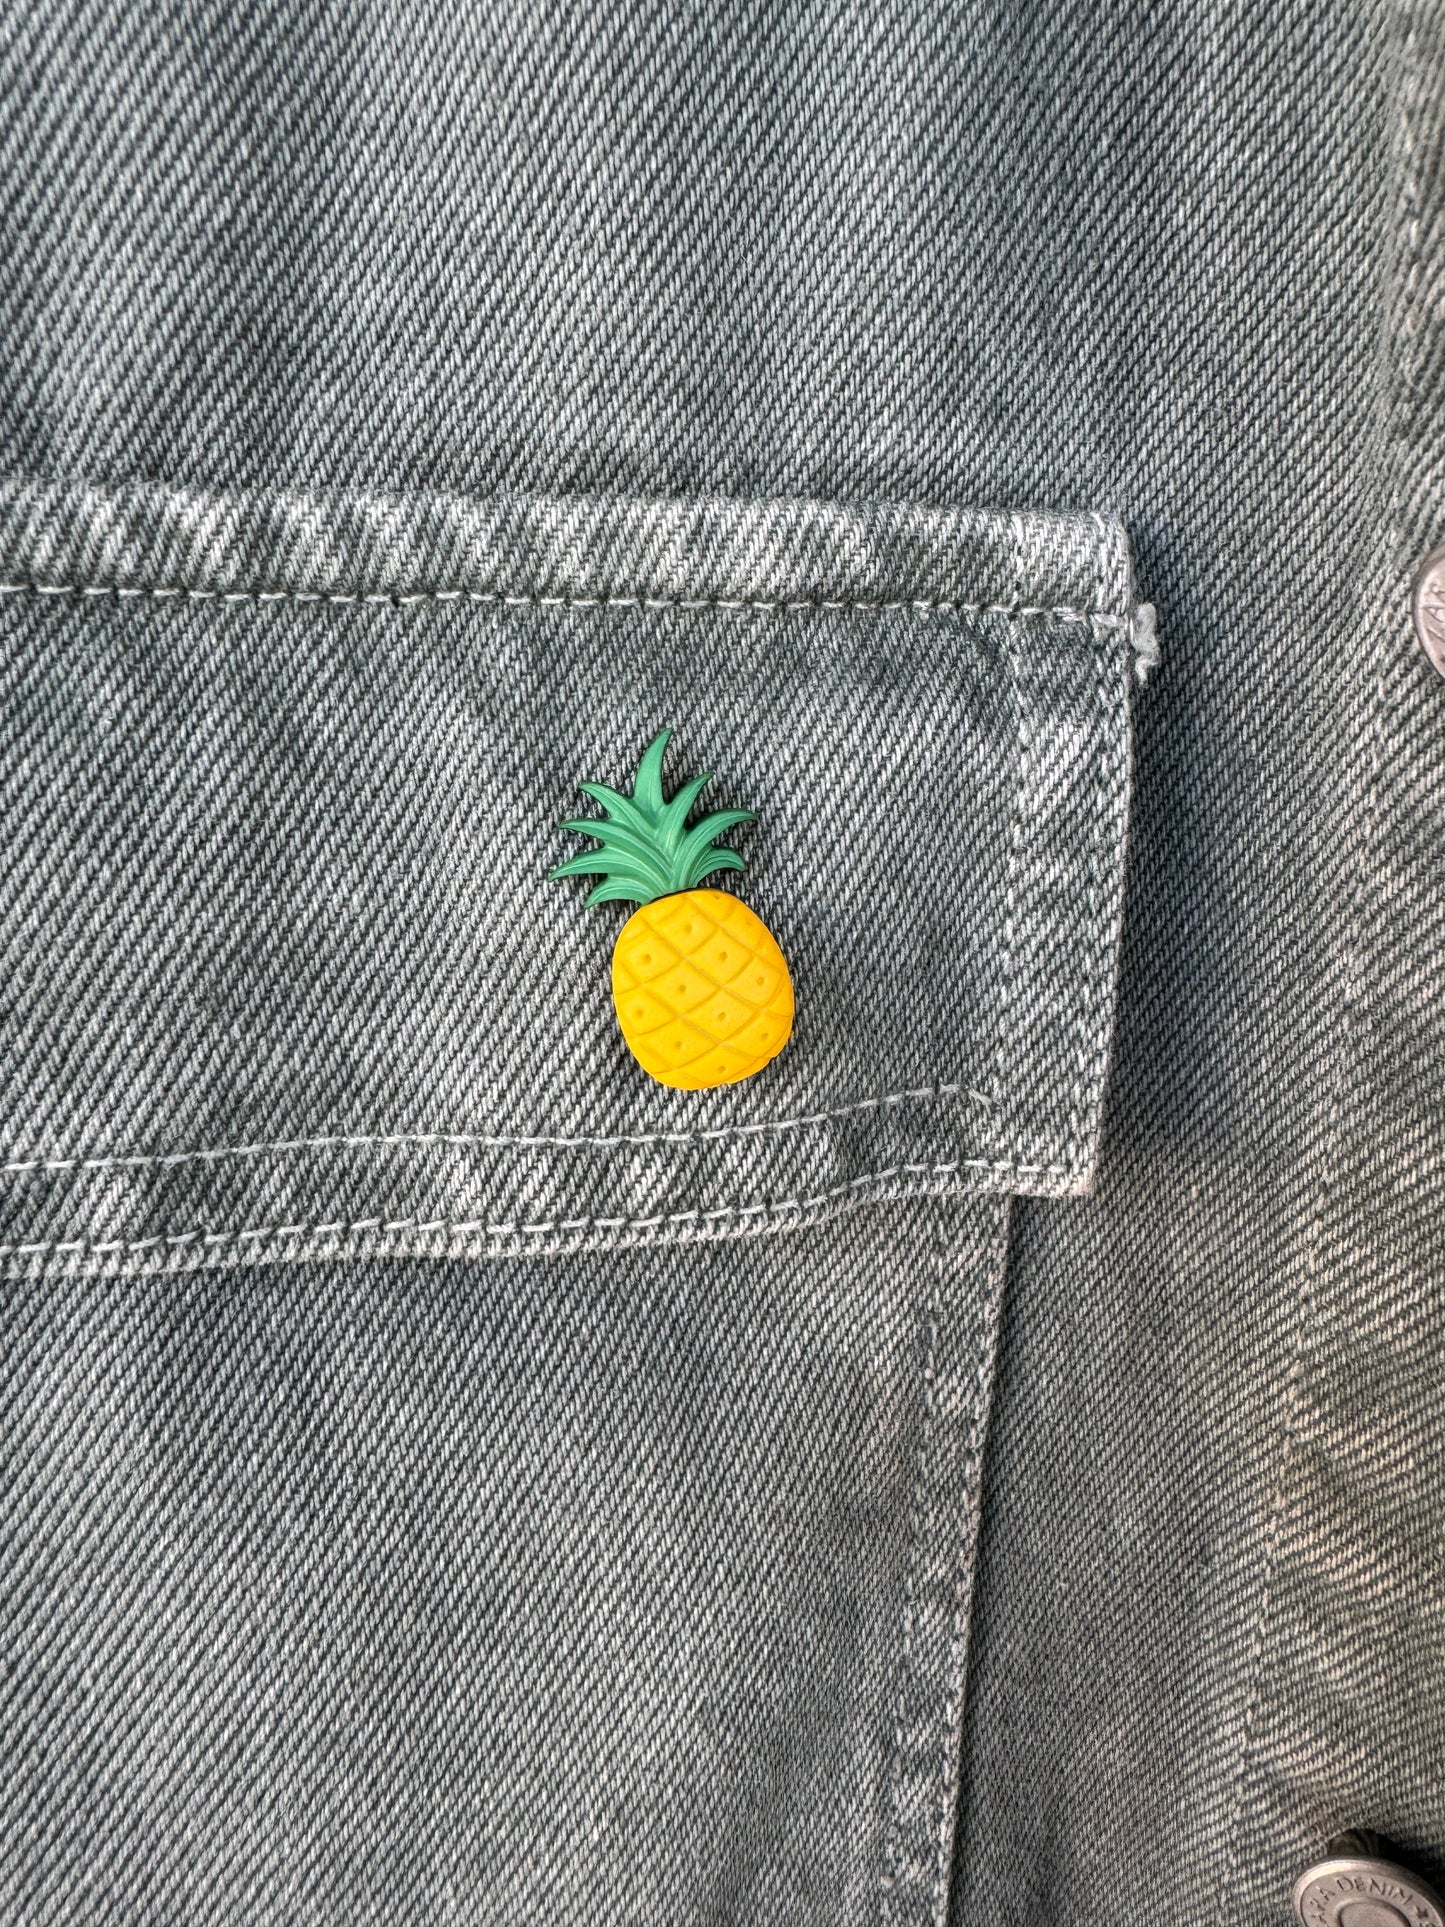 Pineapple Adornments Novelty Fruit Pin Brooch